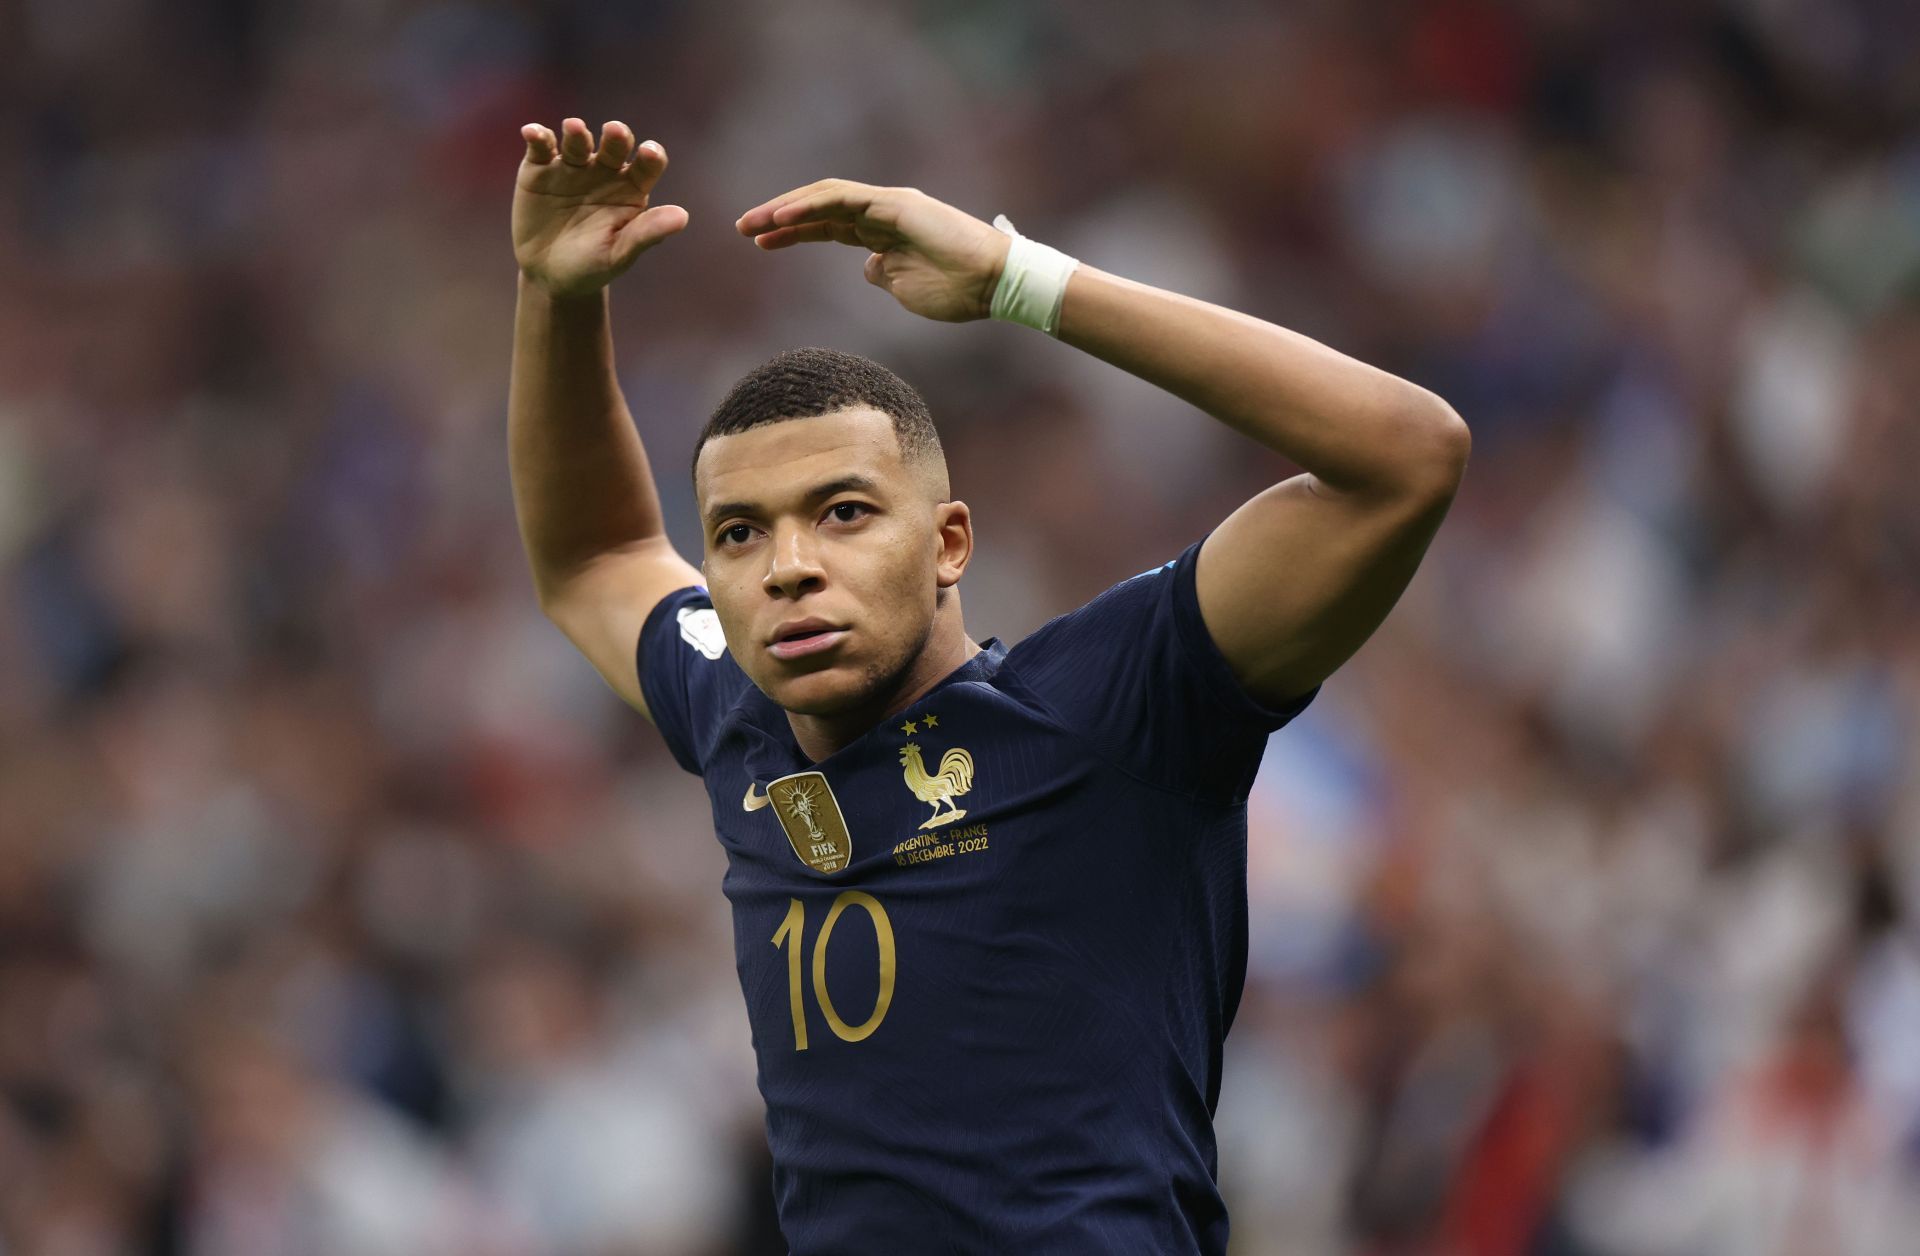 Mbappe was approached by Arsenal in 2013